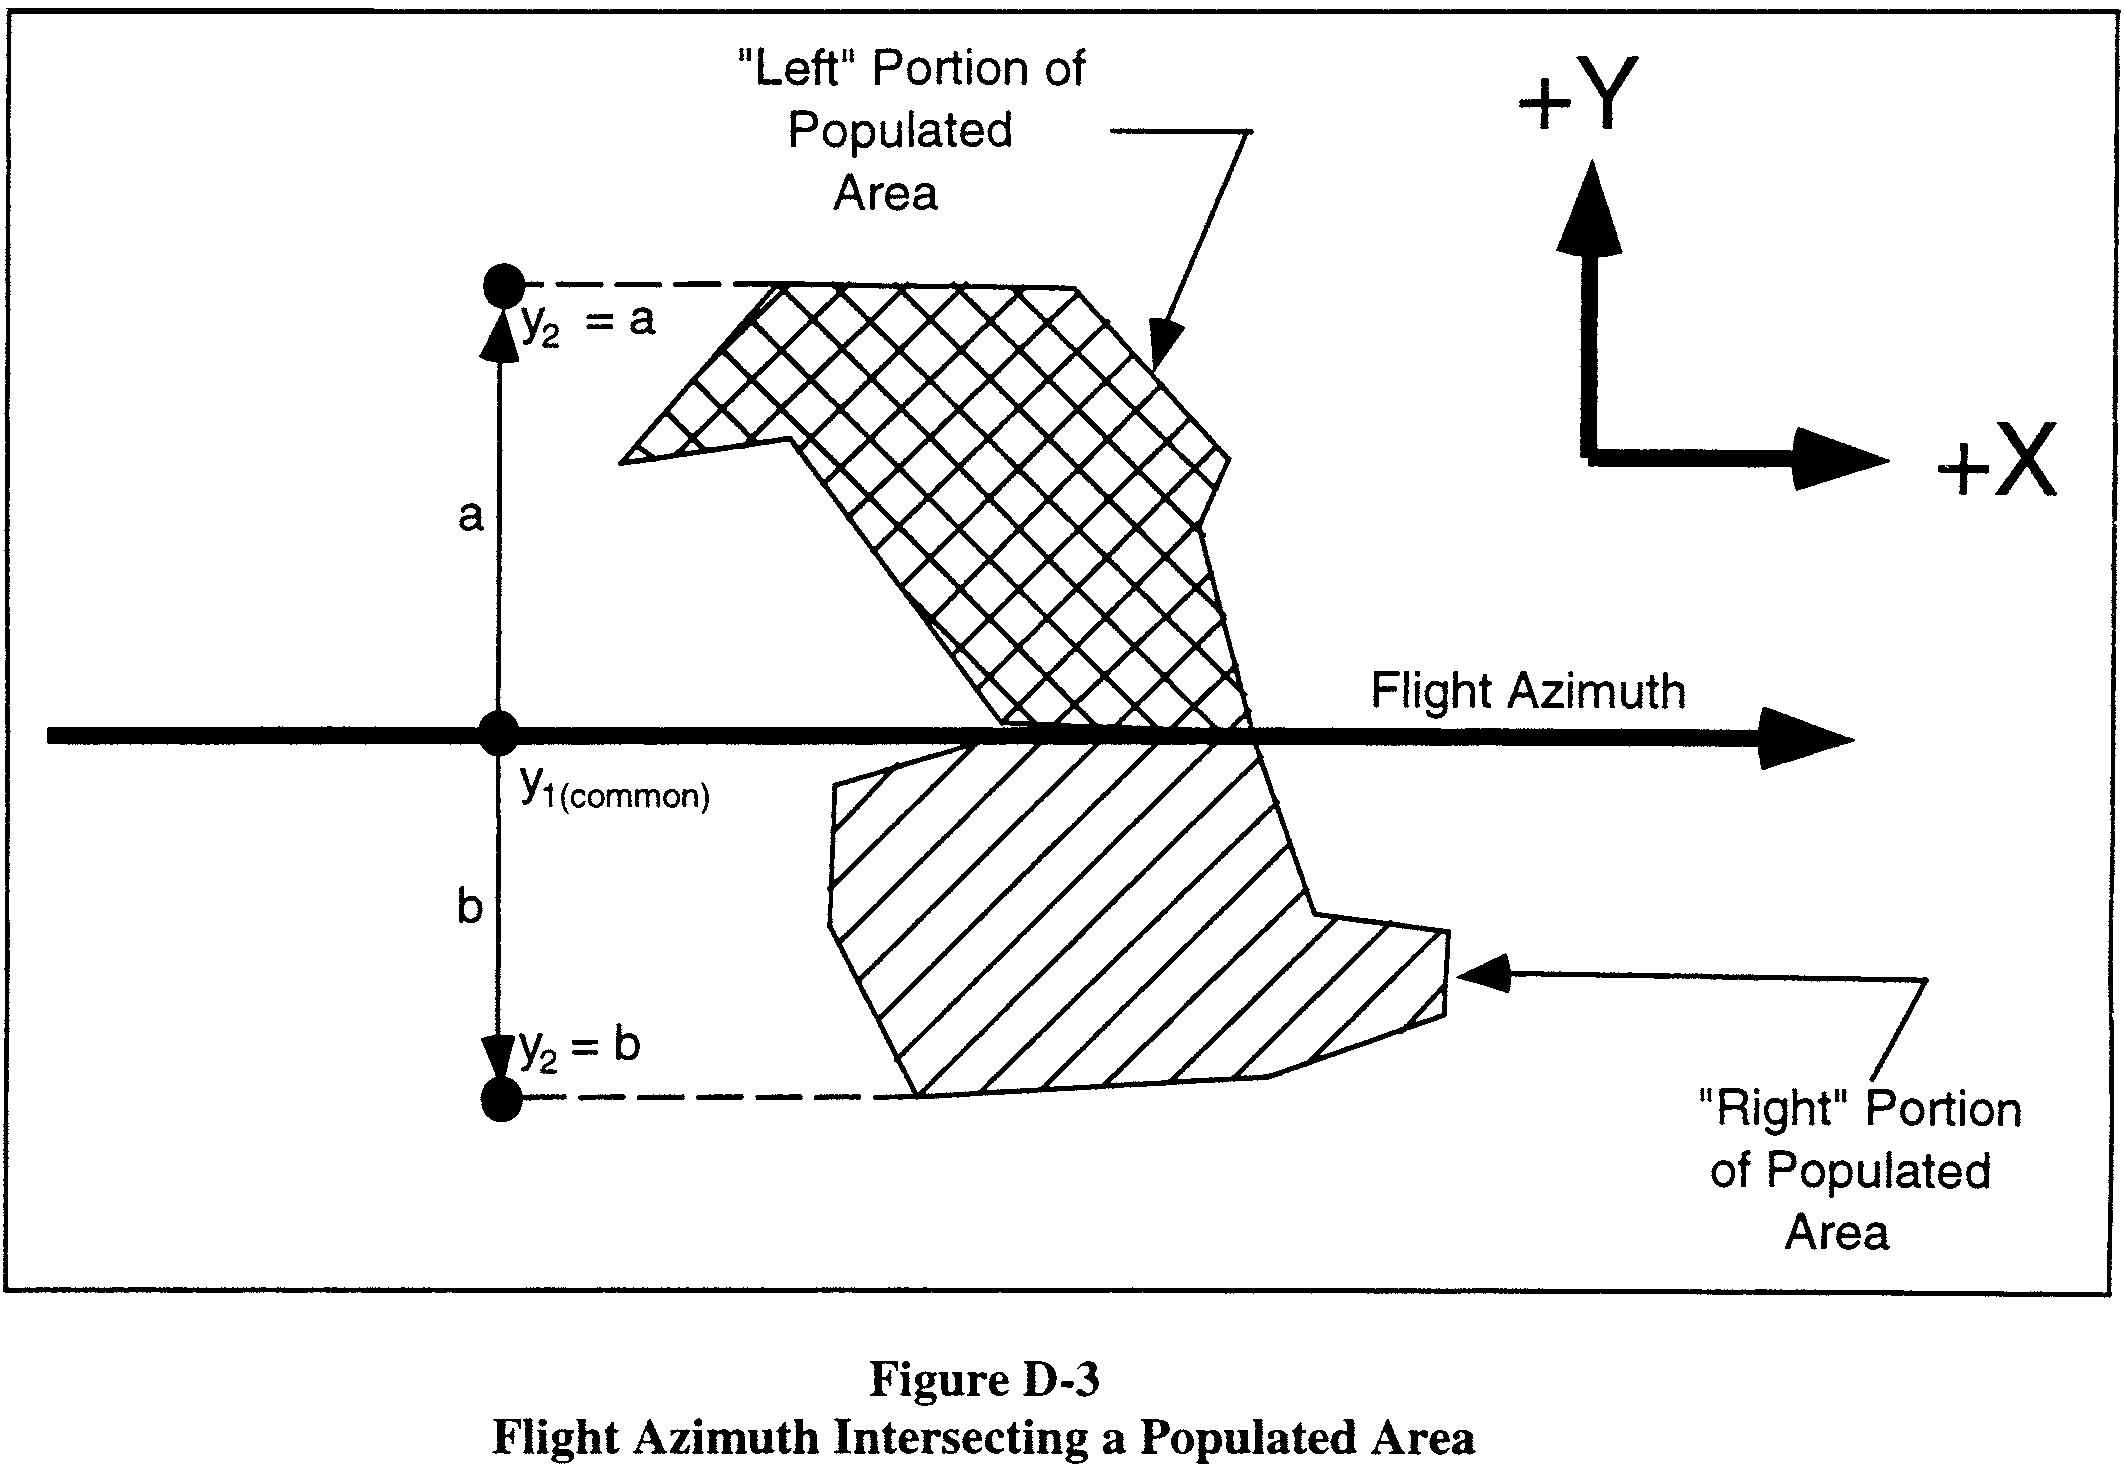 Graphic of (iv) If a populated area intersects the flight azimuth, an applicant shall solve equation D4 by obtaining the solution in two parts. An applicant shall determine, first, the probability between y1 = 0 and y2 = a and, second, the probability between y1 = 0 and y2 = b, as depicted in figure D-3. The probability Py is then equal to the sum of the probabilities of the two parts. If a populated area intersects the line that is normal to the flight azimuth on the impact point, an applicant shall solve equation D3 by obtaining the solution in two parts in the same manner as with the values of x.